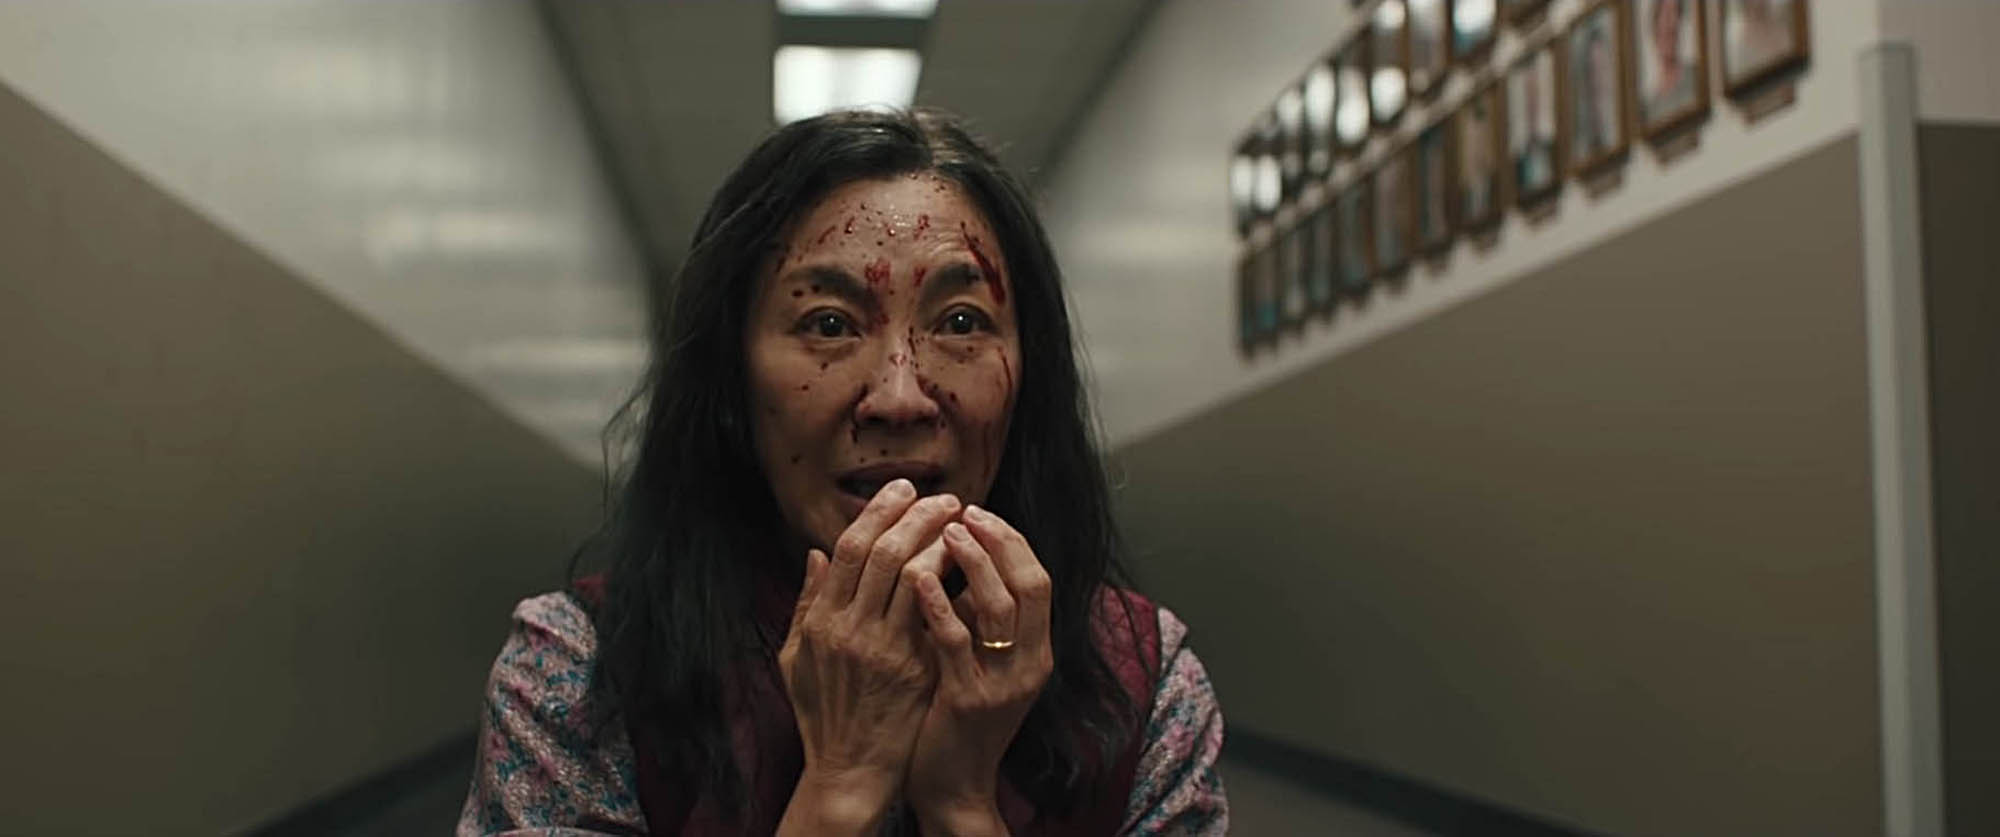 A24's Everything Everywhere All at Once starring Michelle Yeoh